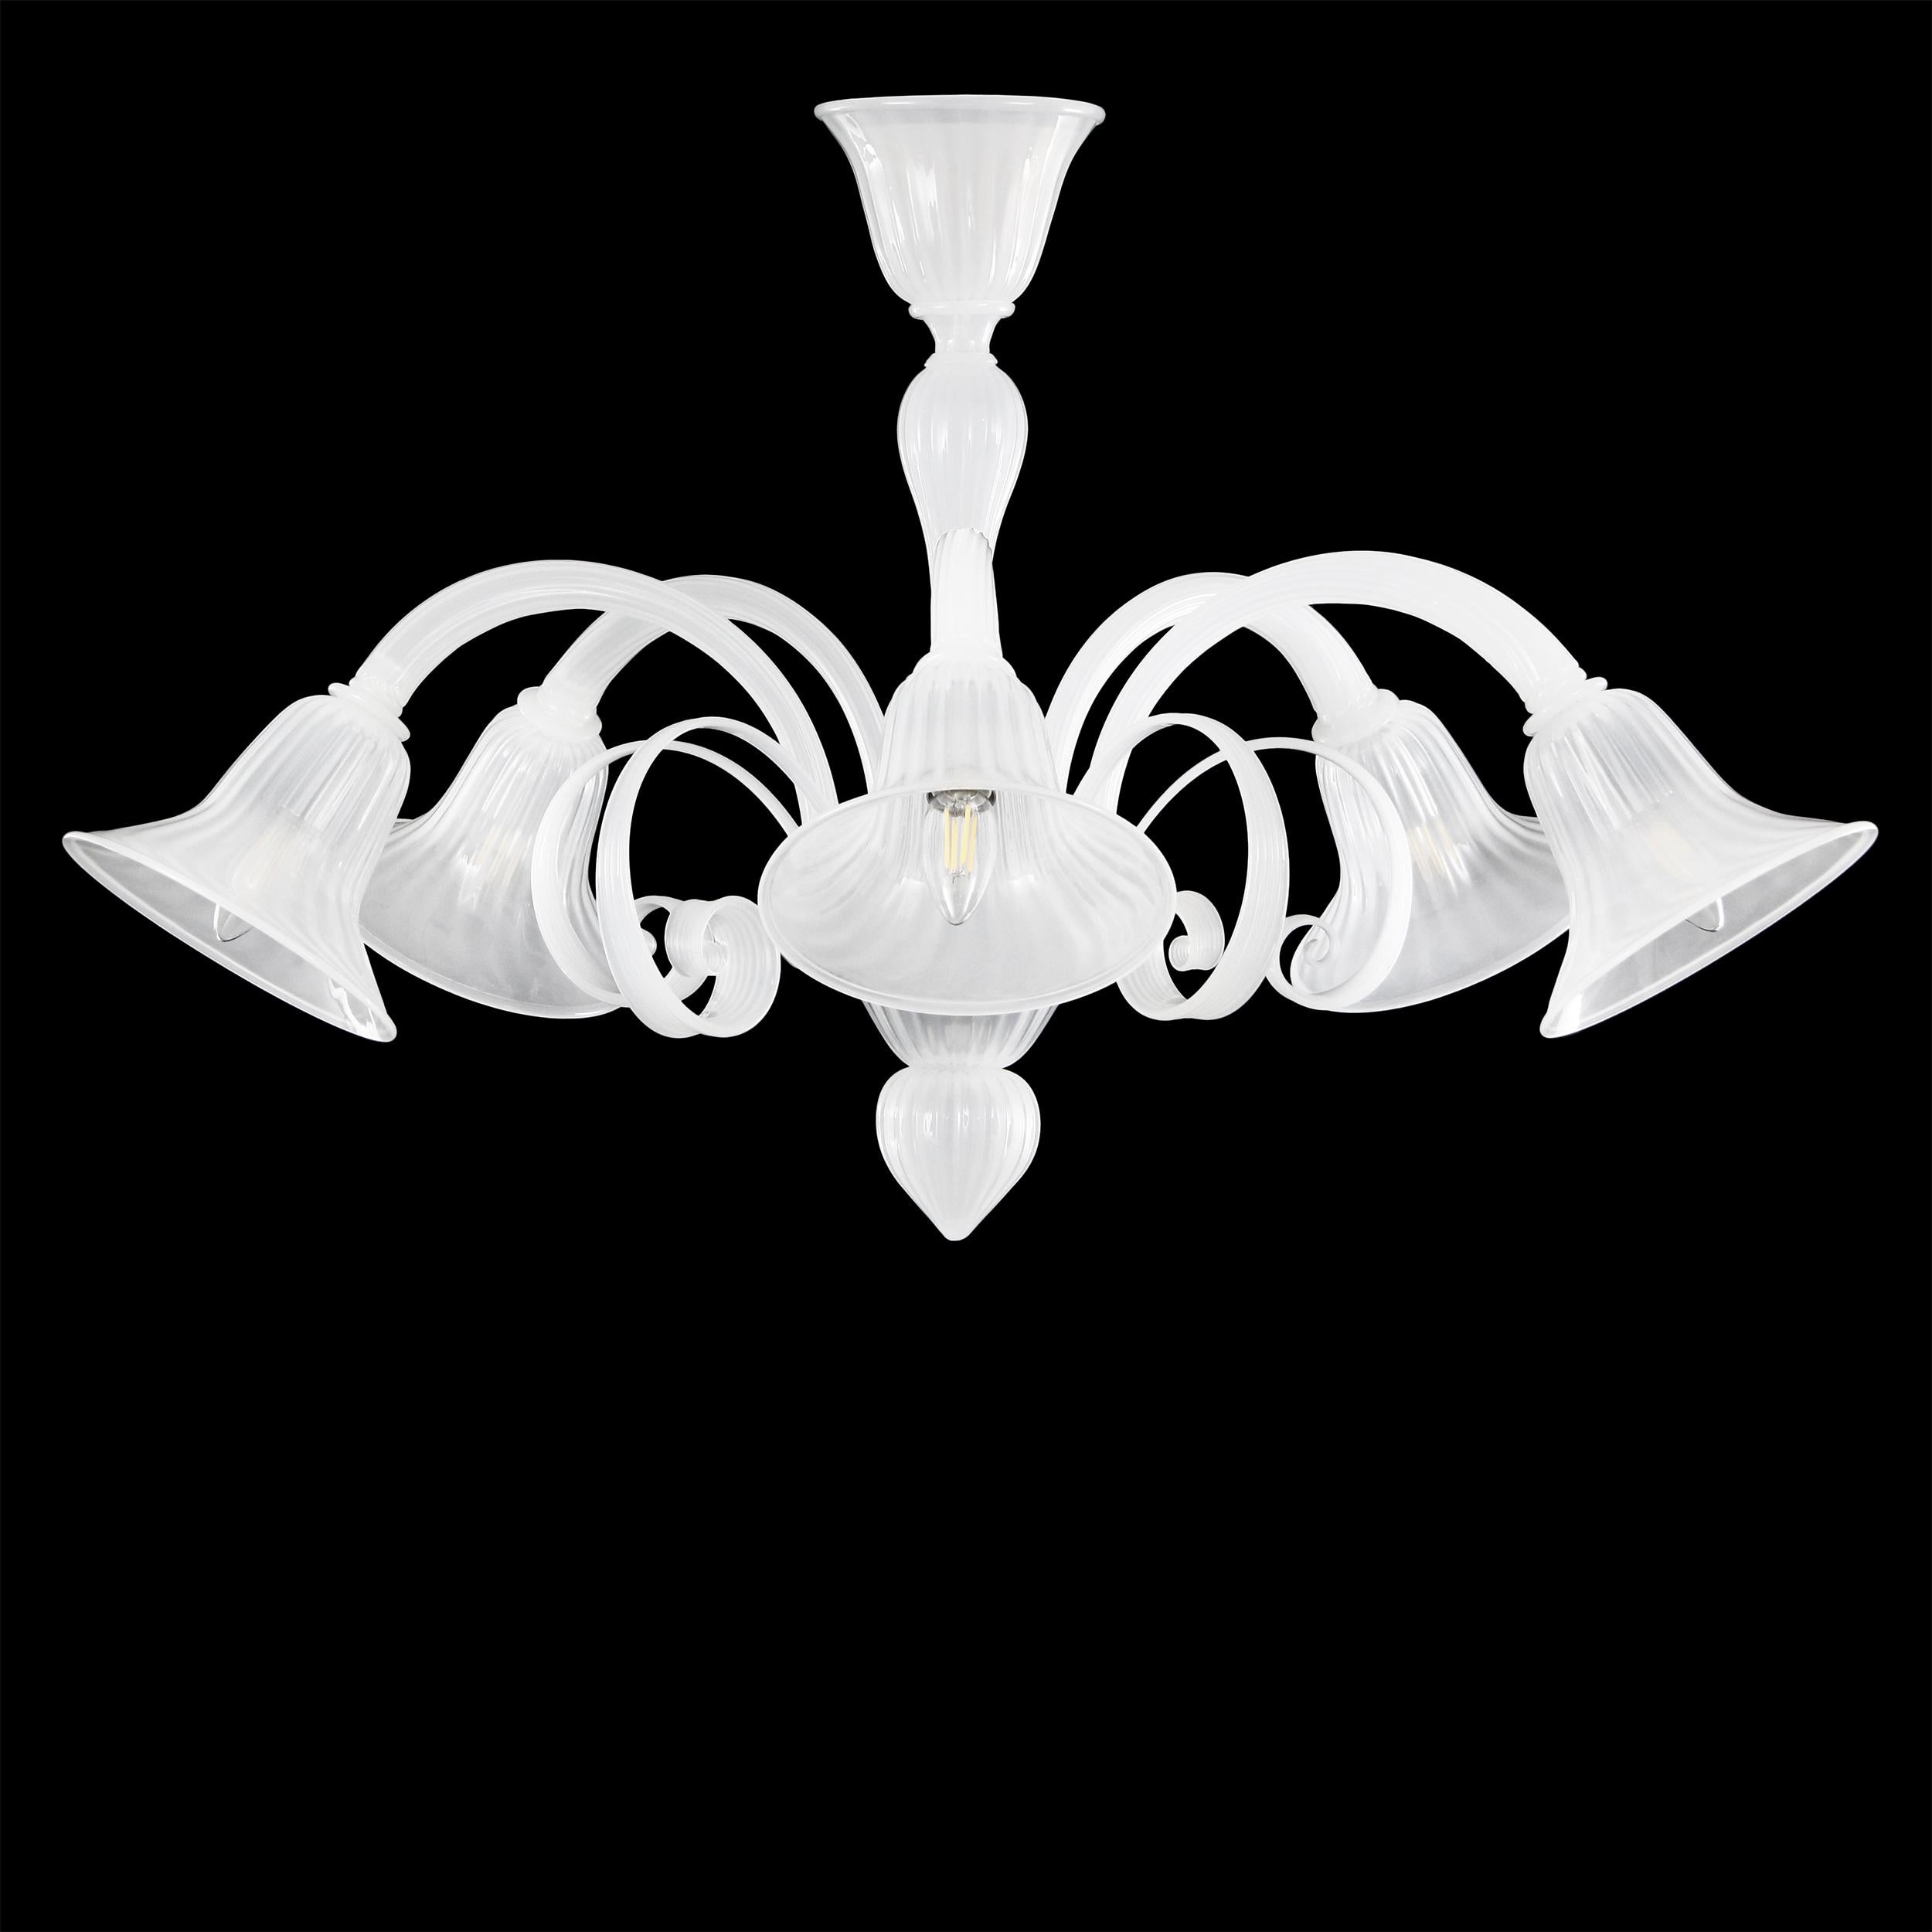 Capriccio by Multiforme is a 5 lights ceiling lamp white silk Murano glass with curls.
Inspired by the Classic Venetian tradition it is characterized by a central column where many blown glass “pastoral” elements are installed. These curl elements